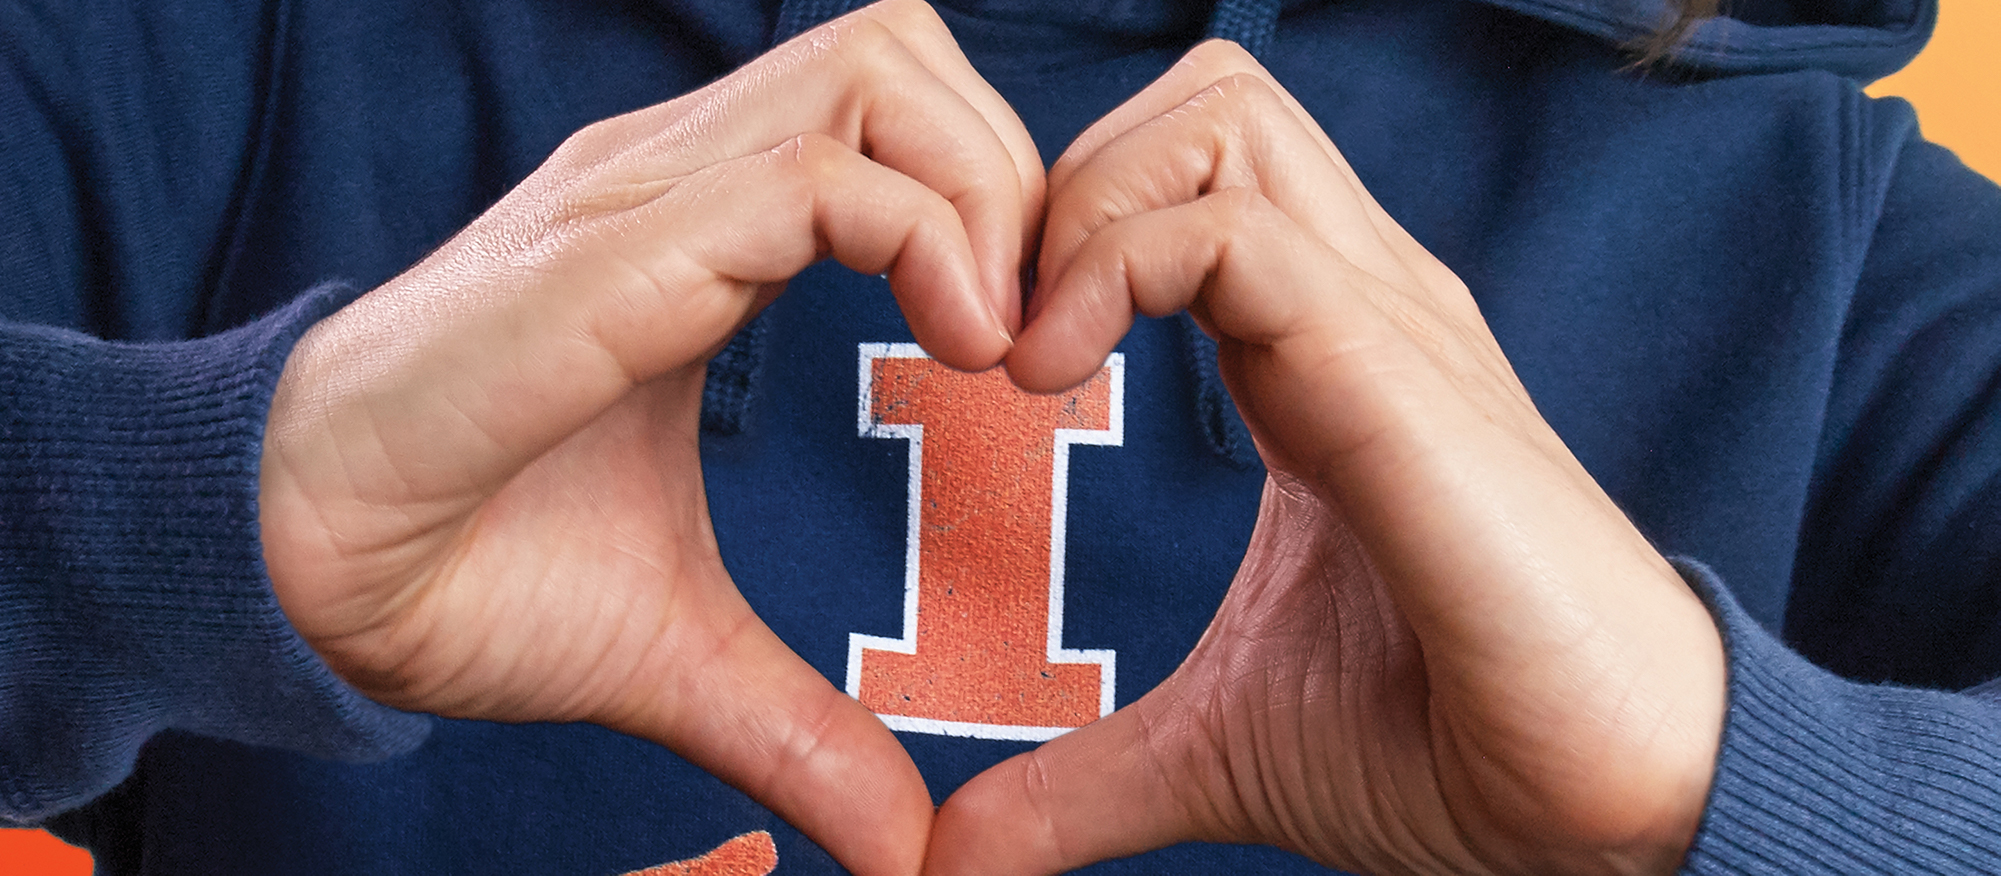 Two hands making a heart shape with an Illini "I" in the space of the heart shape.